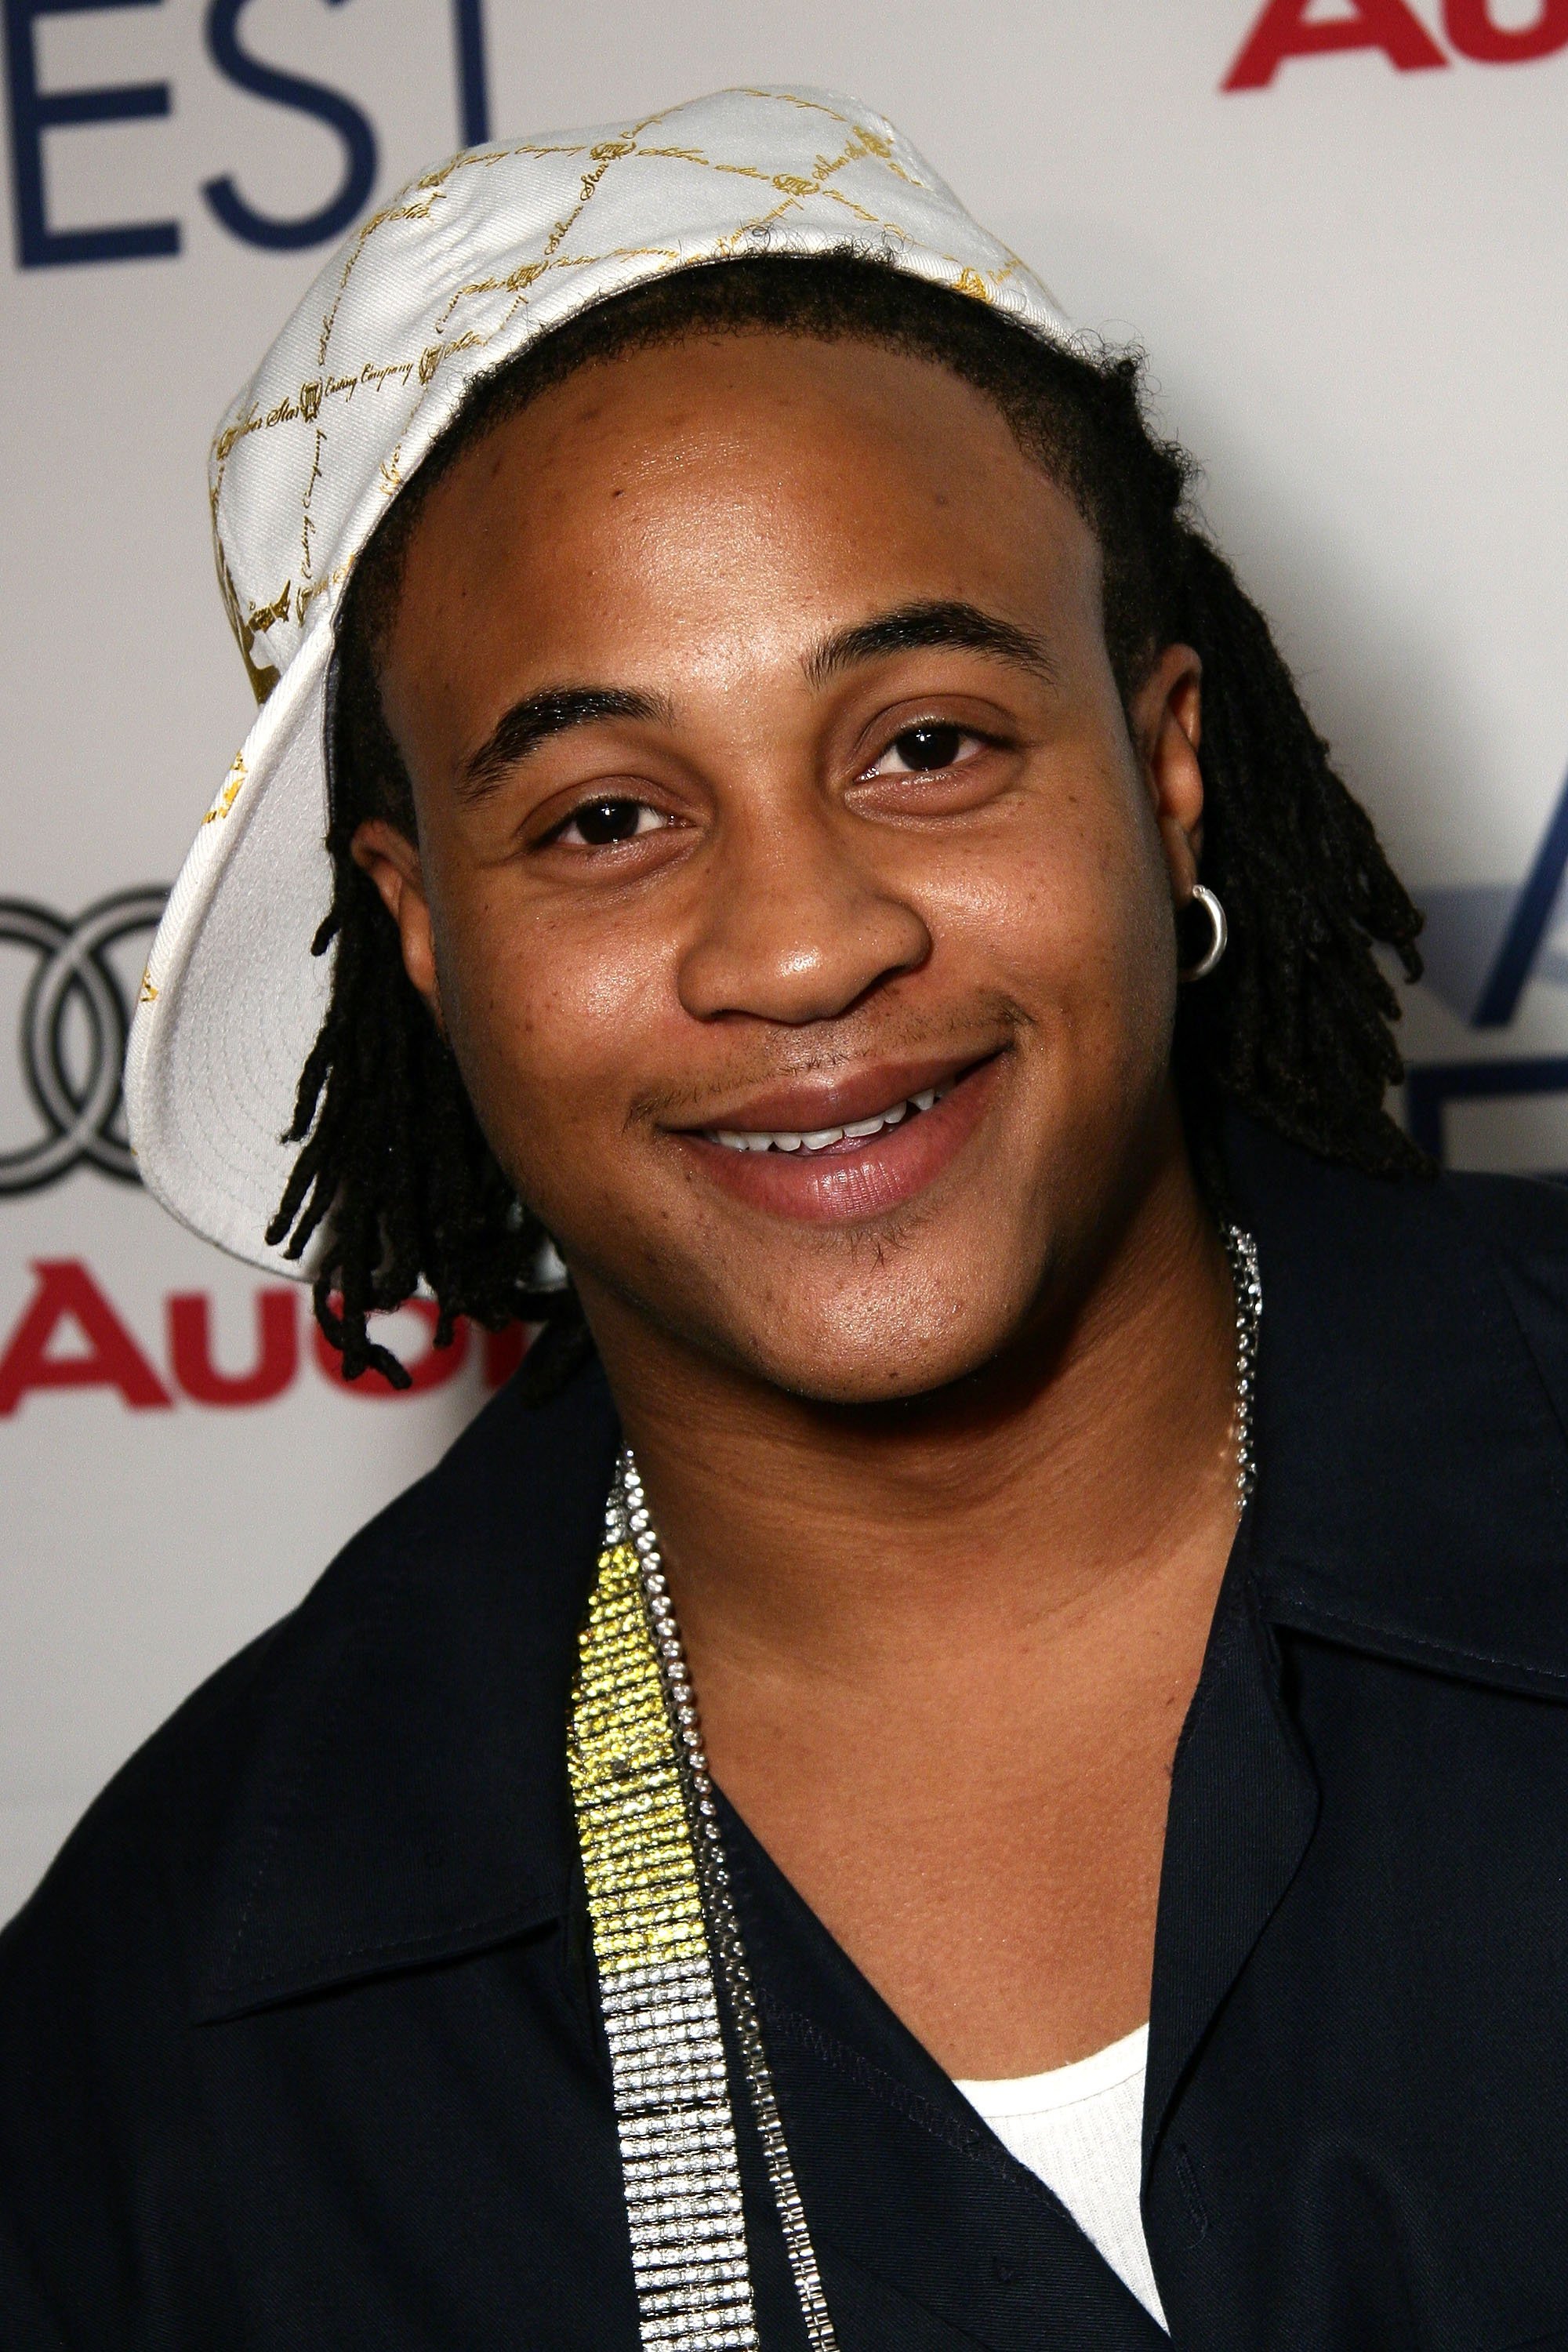 Orlando Brown at the world premiere of "Public Enemy" in Los Angeles in 2007 | Source: Getty Images